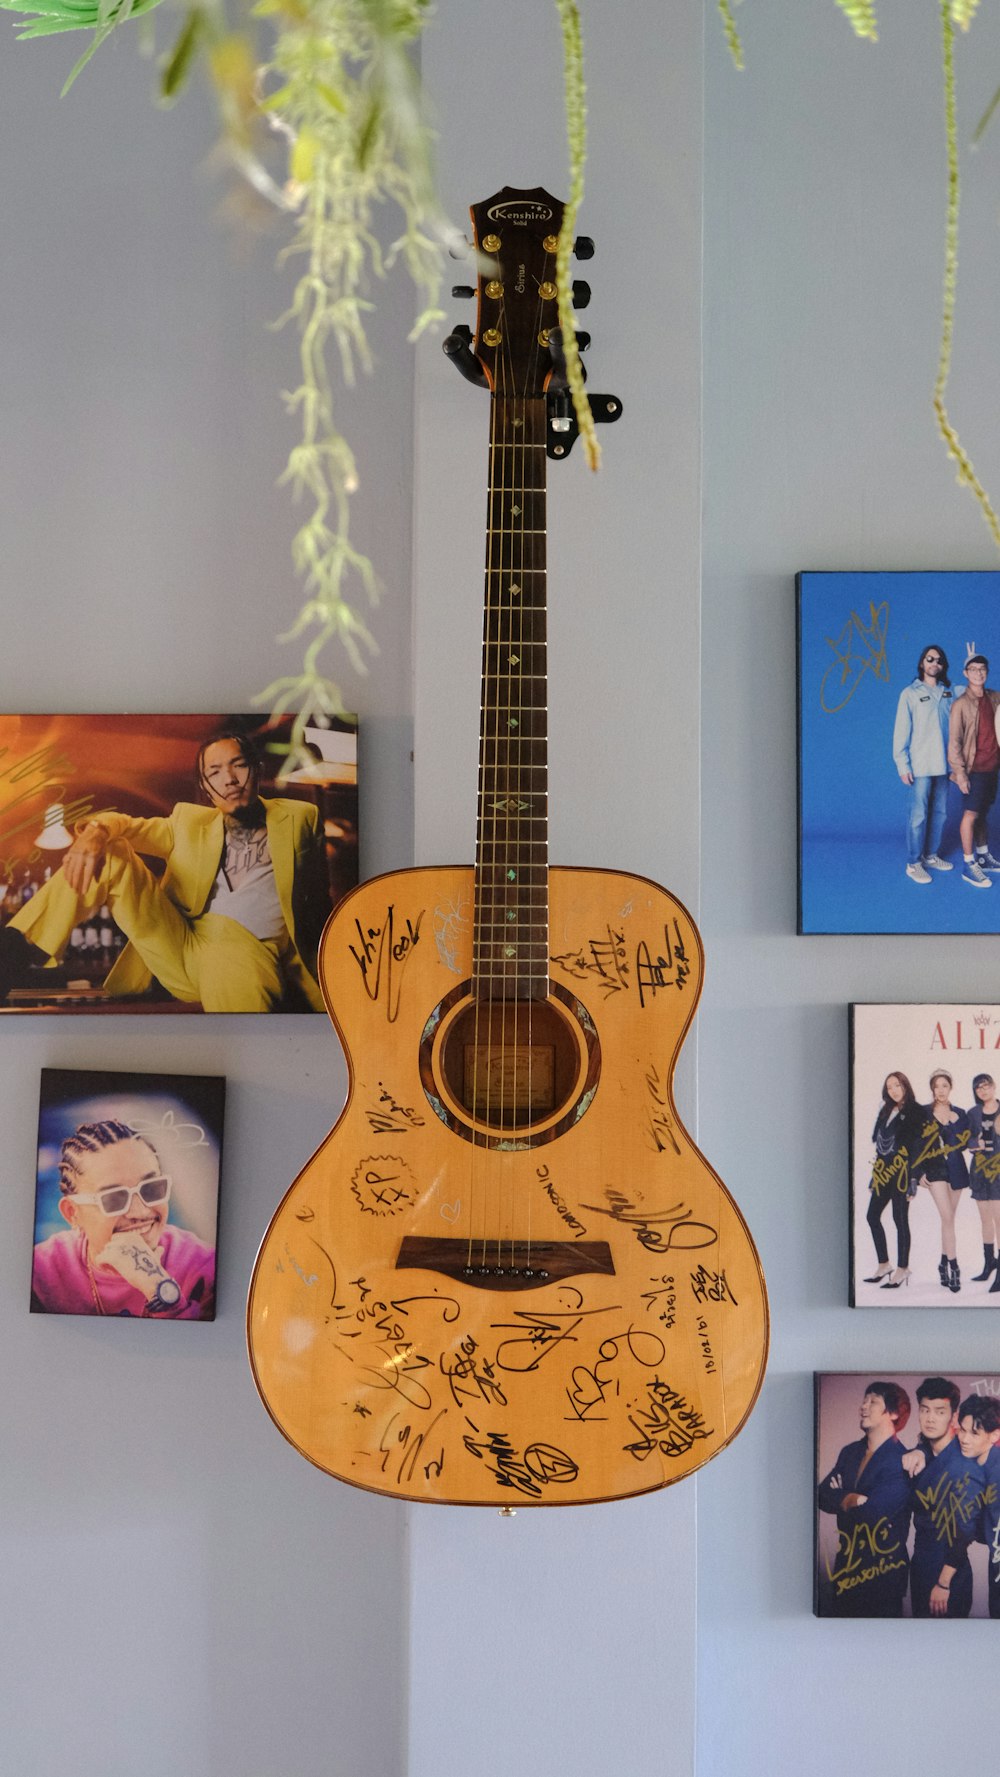 a guitar hanging from a wall with pictures on it photo – Free Singha park  chiang rai Image on Unsplash